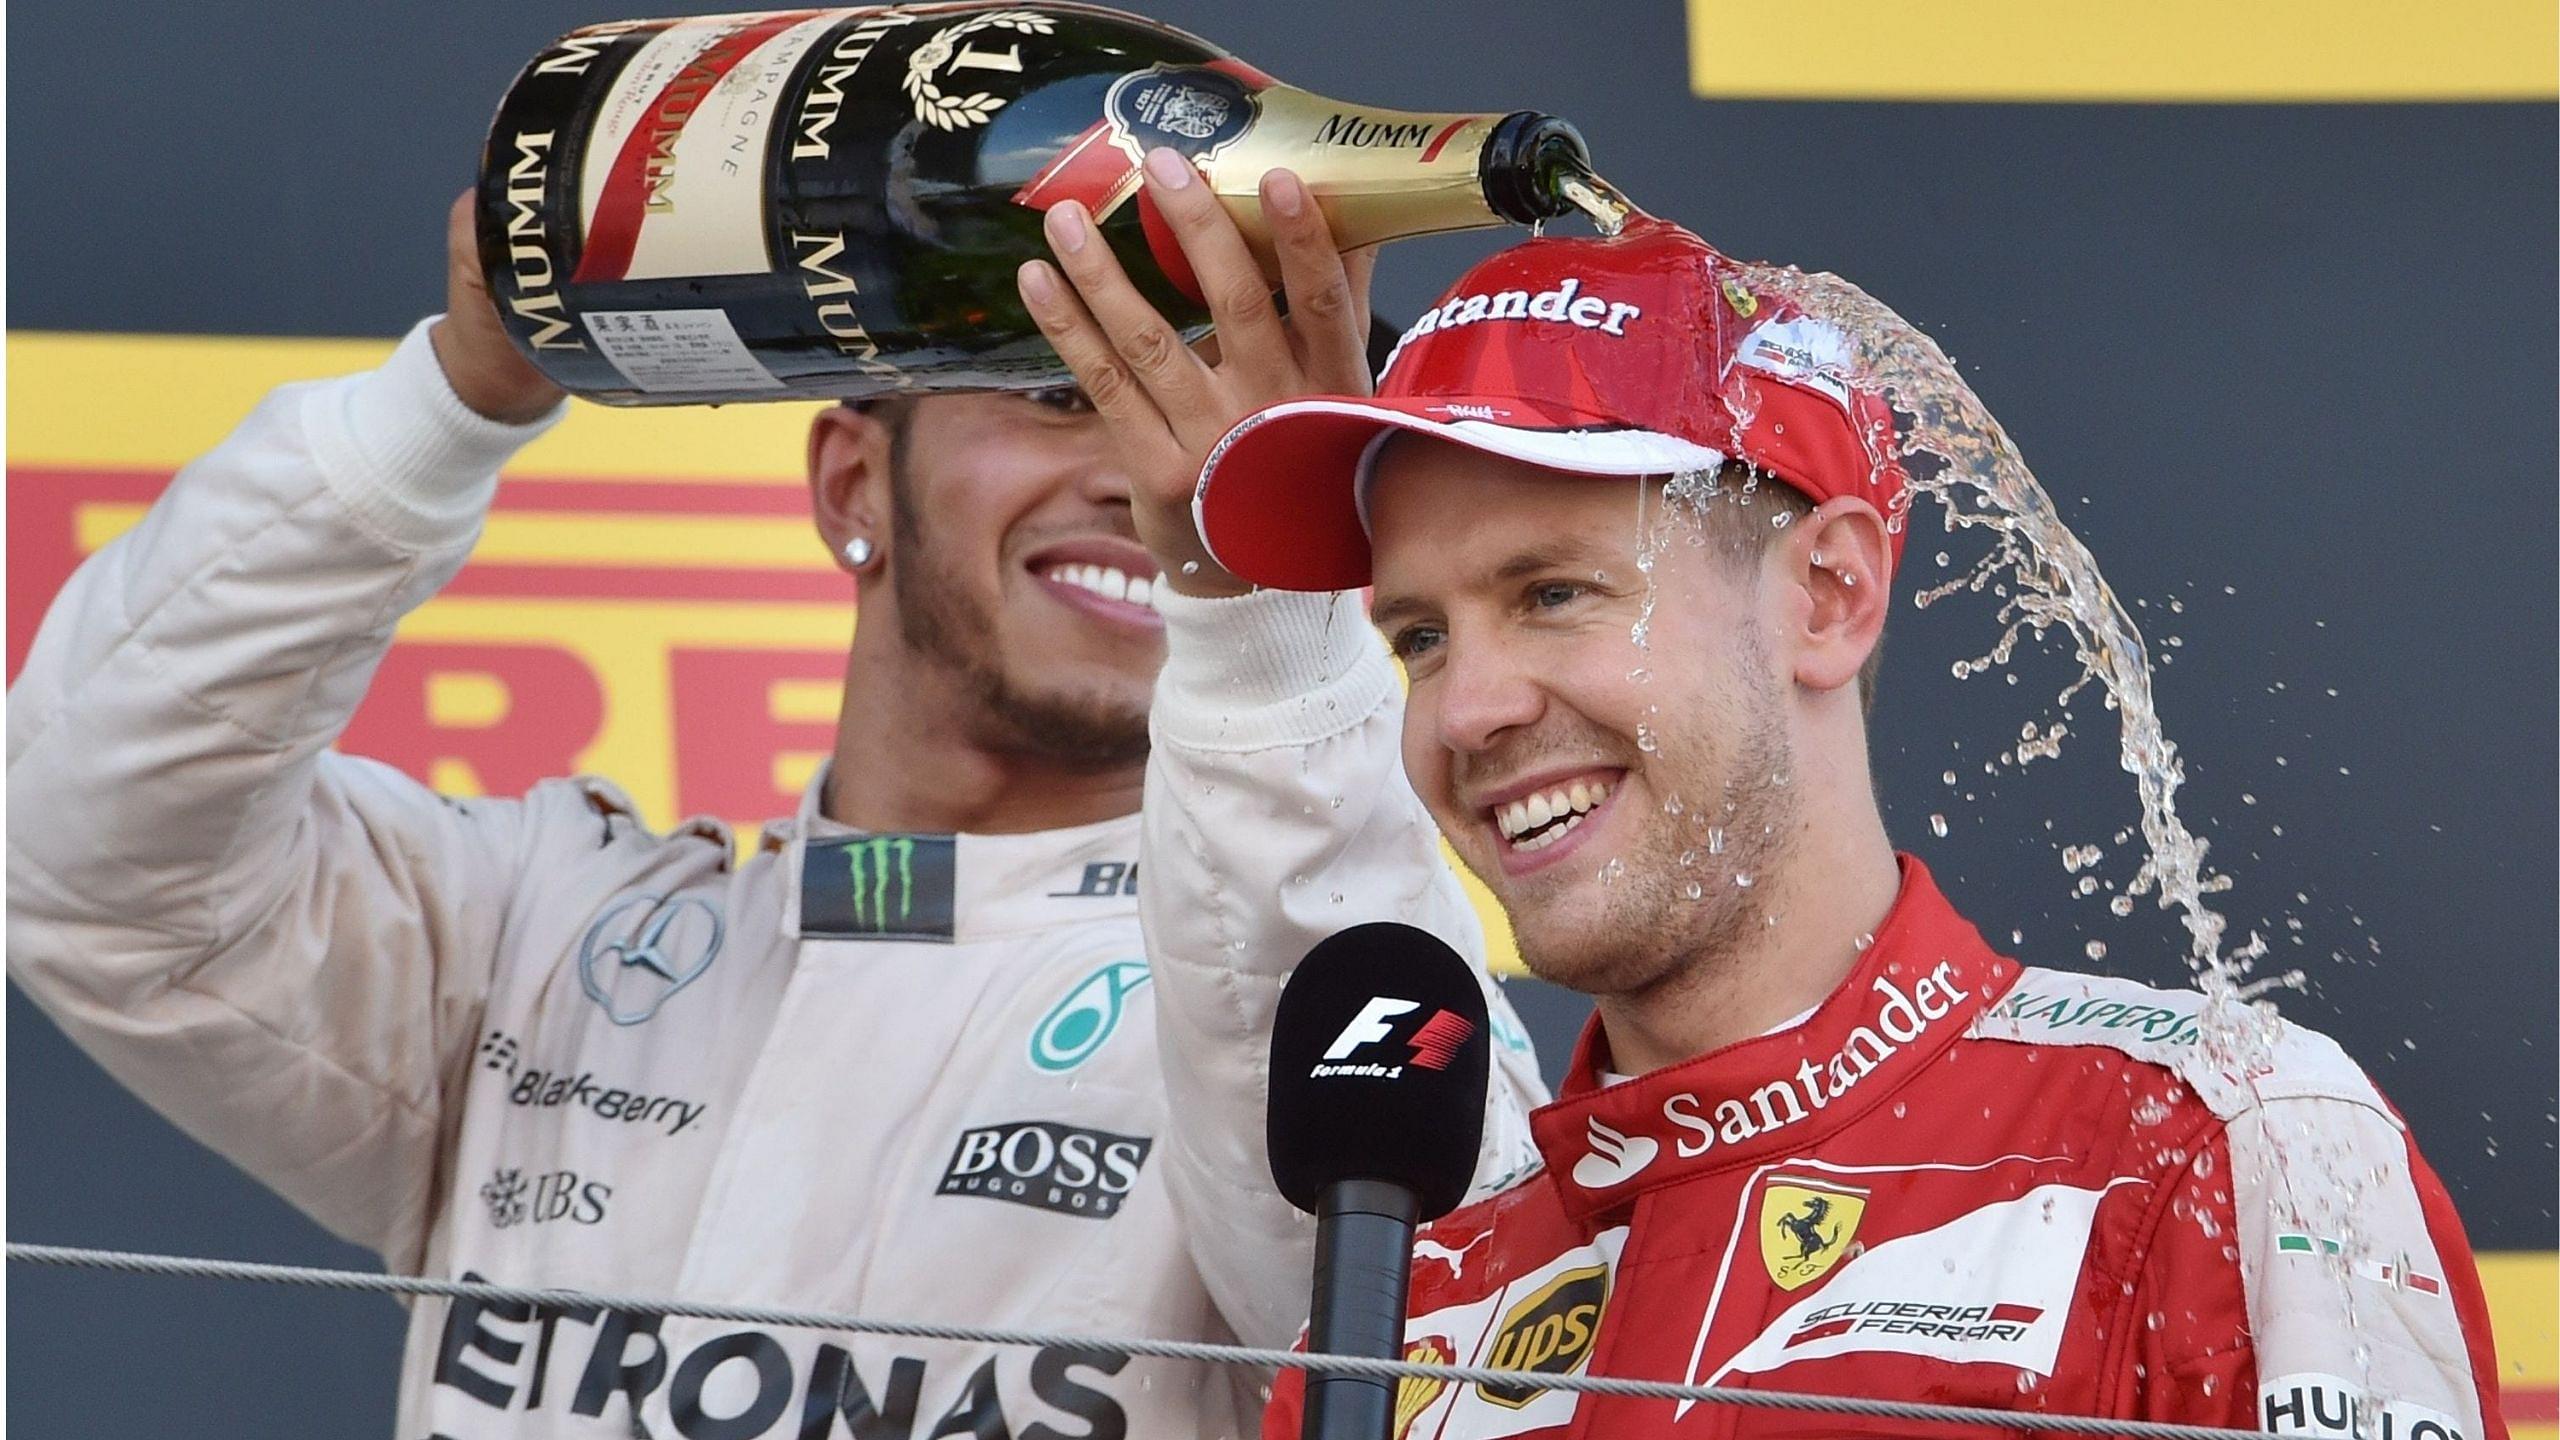 "A surprise to snatch the podium" - Sebastian Vettel shows his class to take Turkish GP podium at Istanbul Park